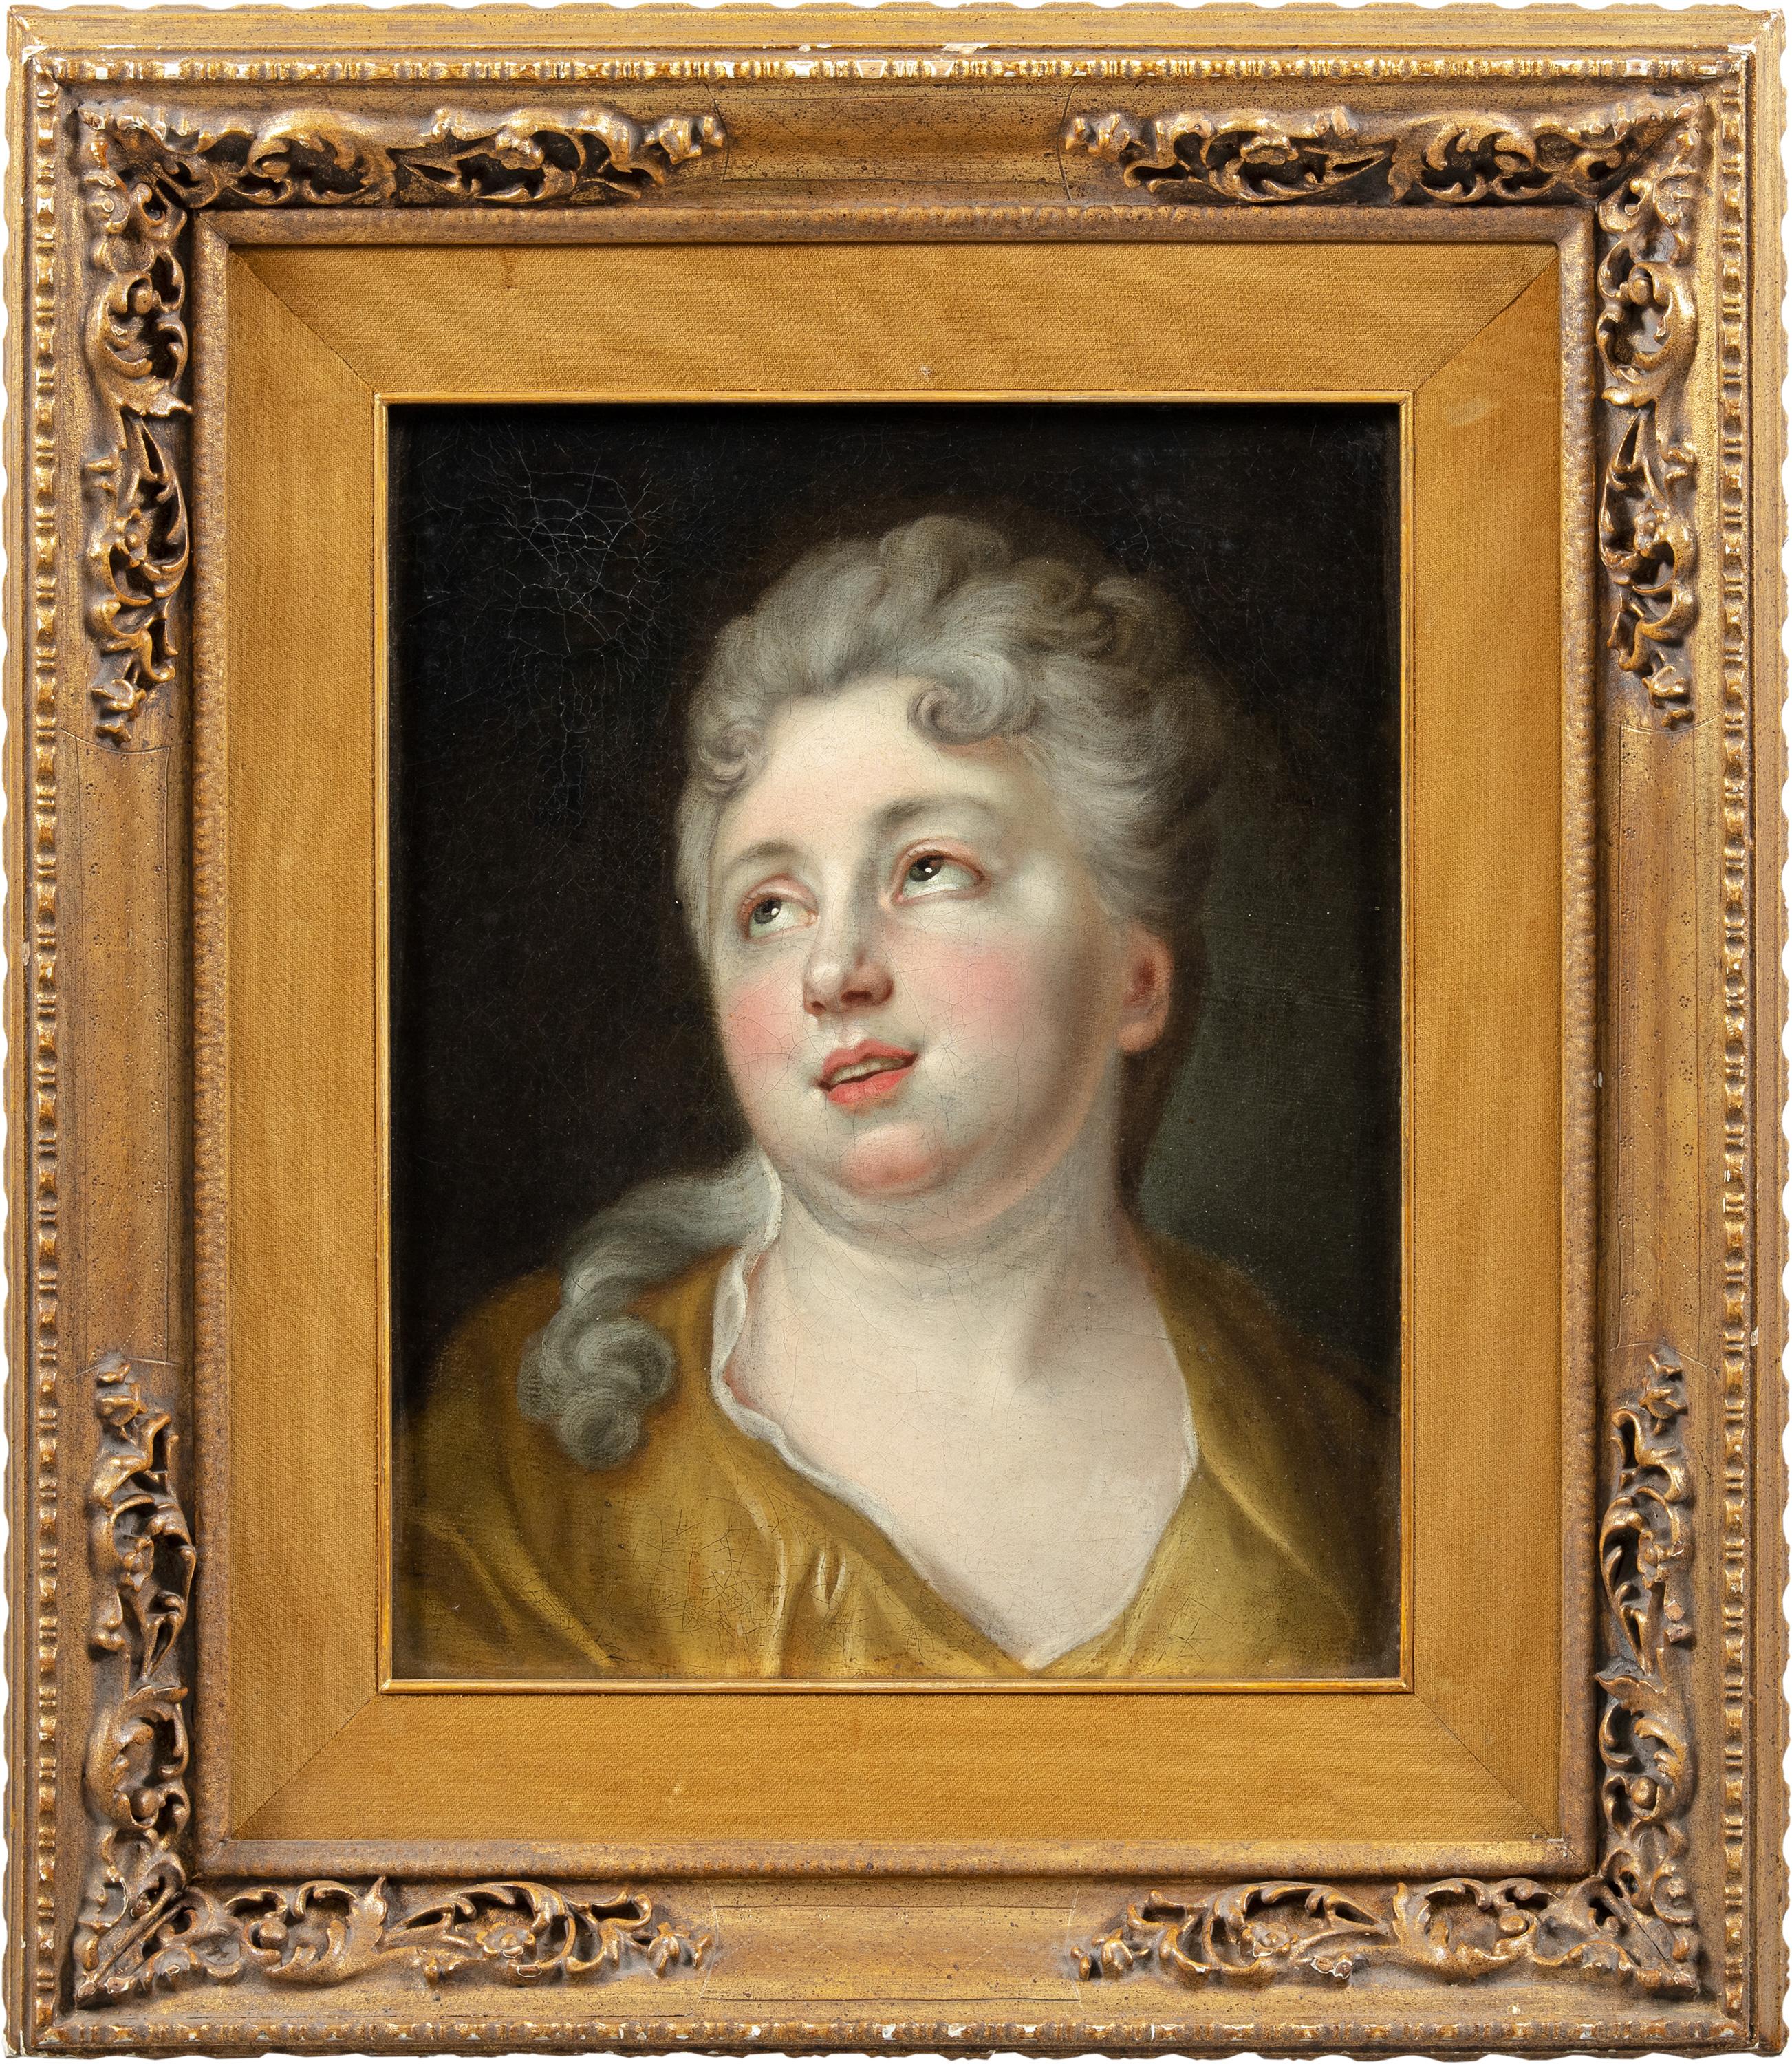 Unknown Figurative Painting - 18th century French figure painting - Portrait lady - Oil on canvas Rococò